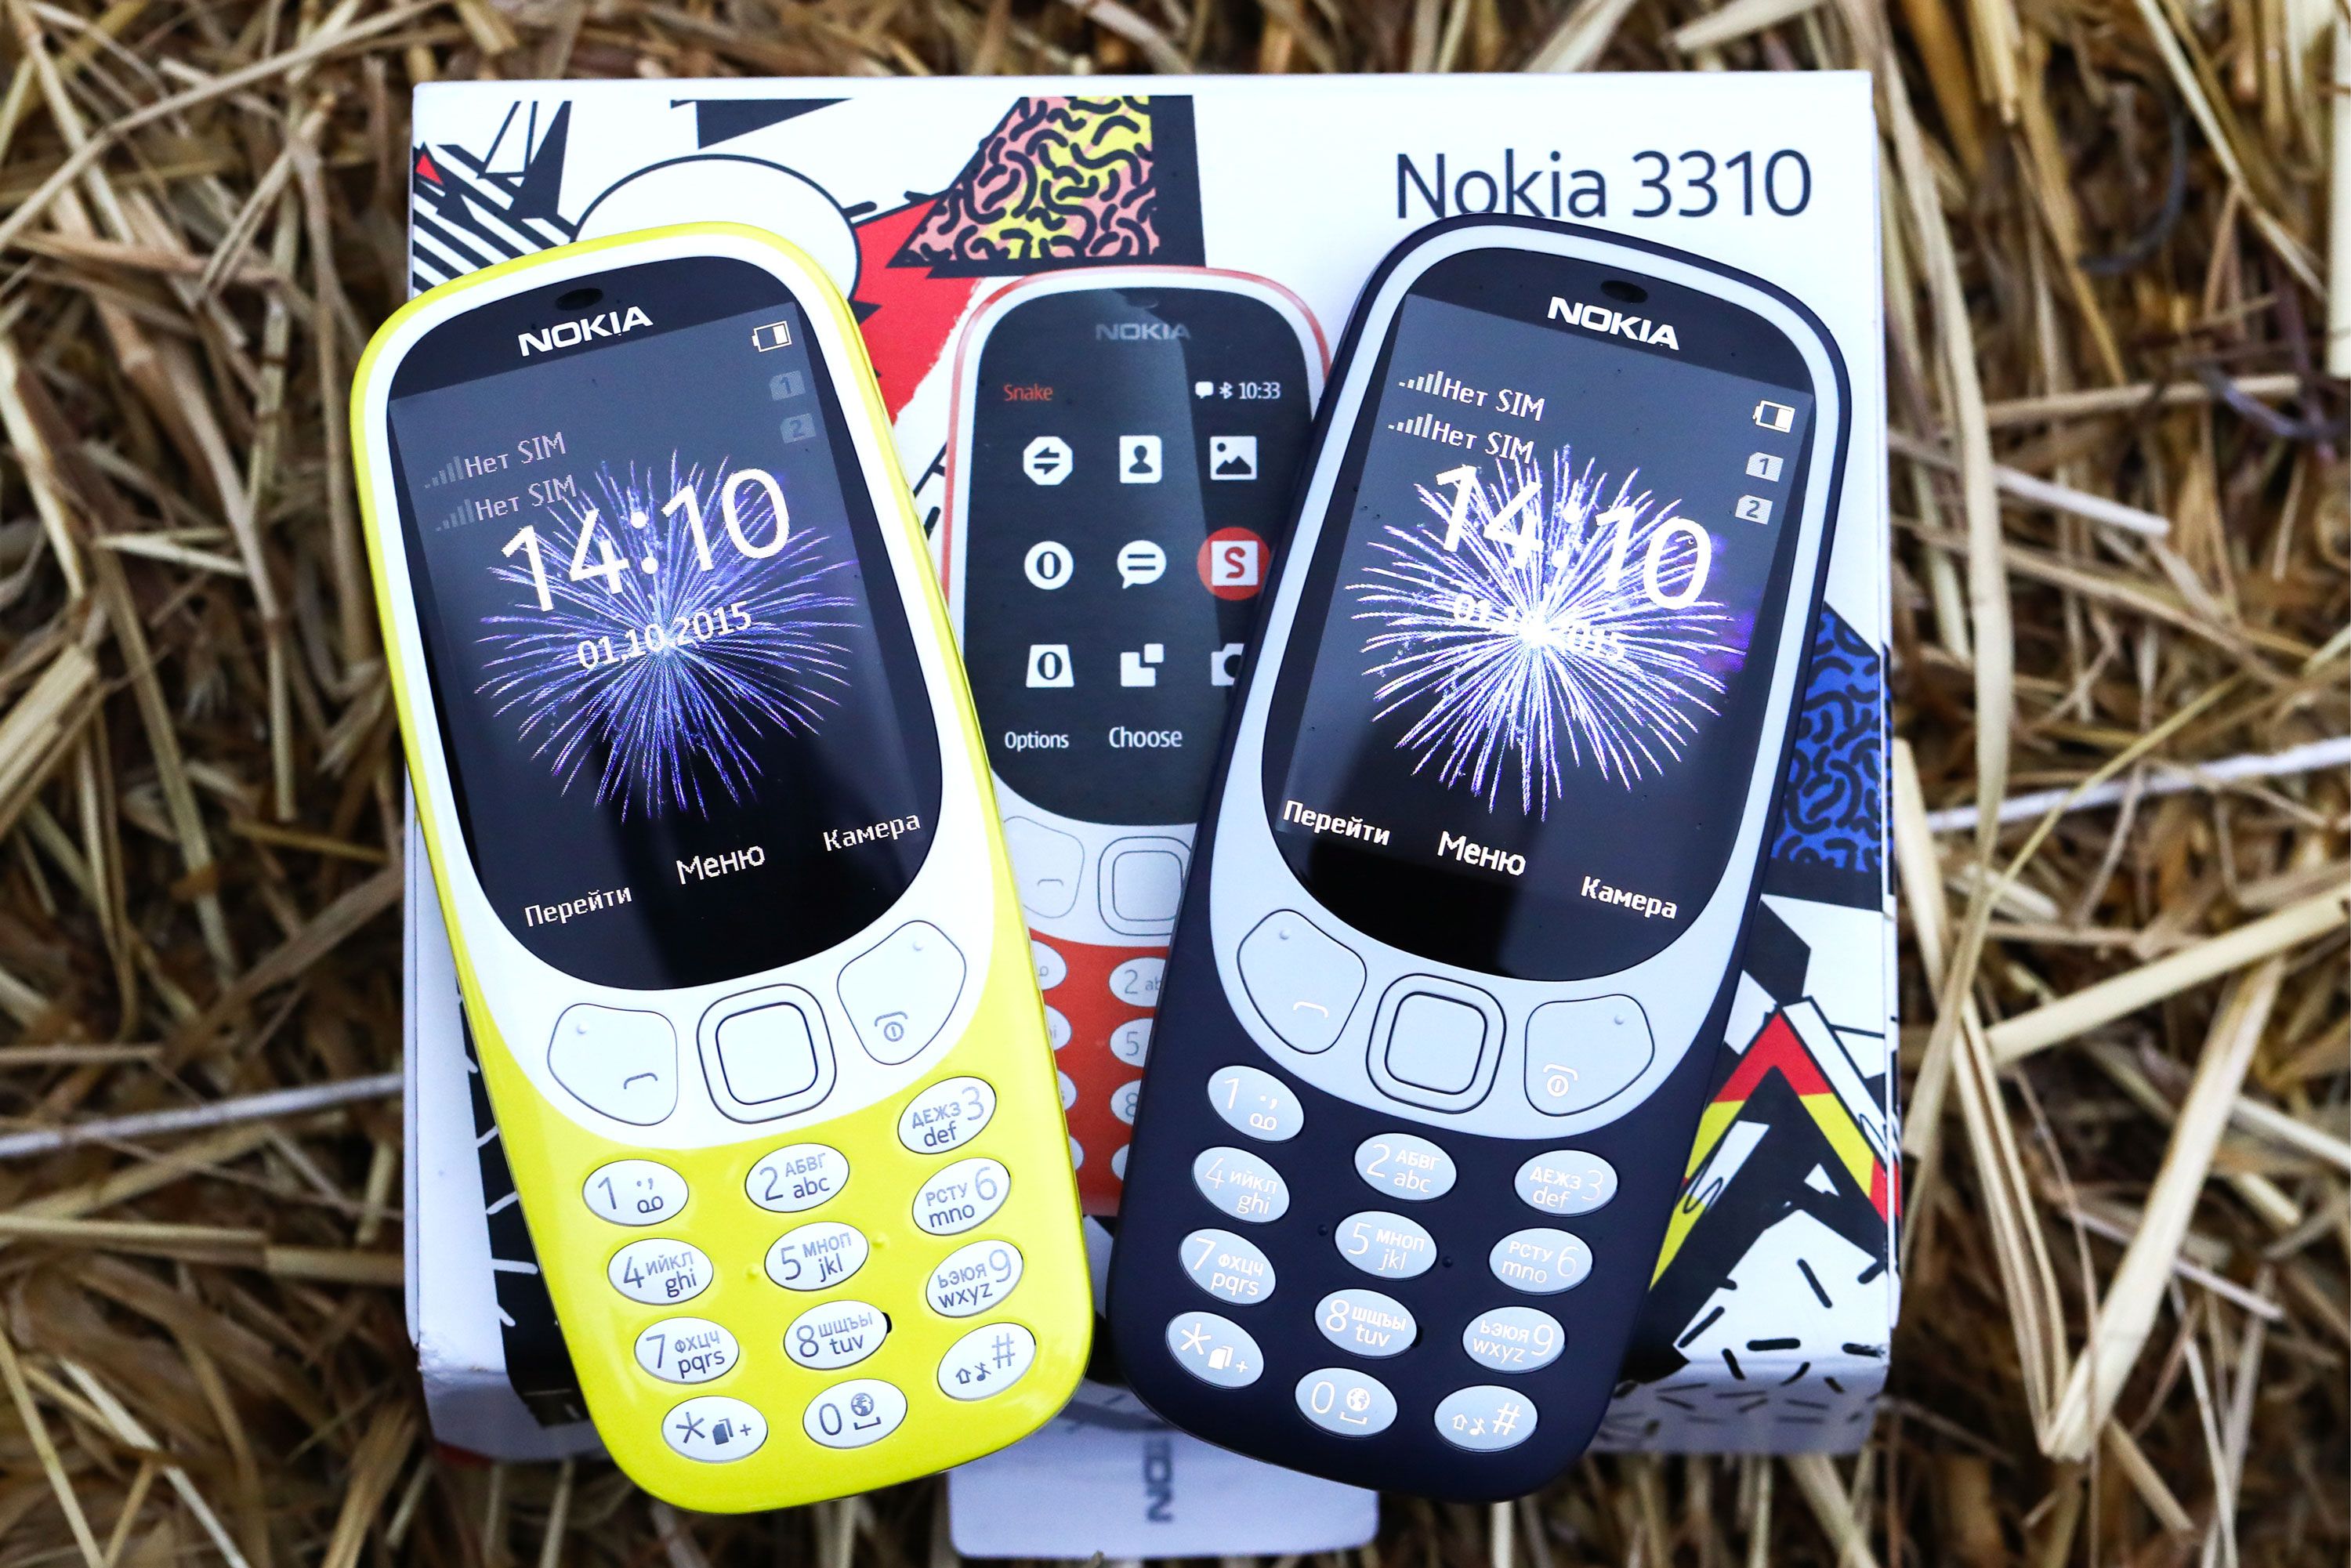 New version of Nokia's Snake game now available on Facebook